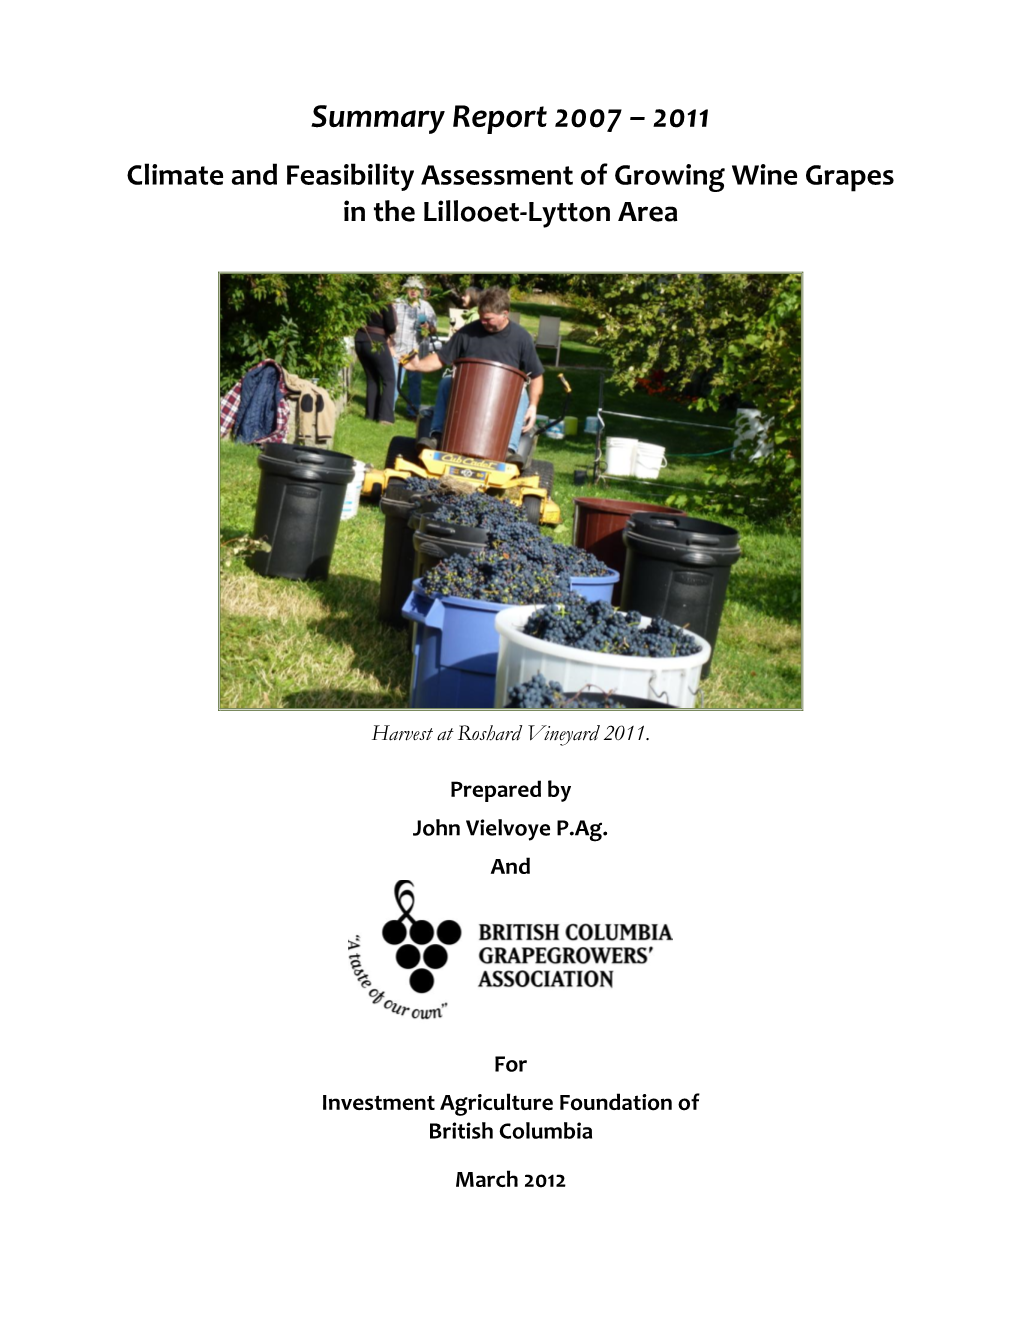 Climatic Suitability and Feasibility